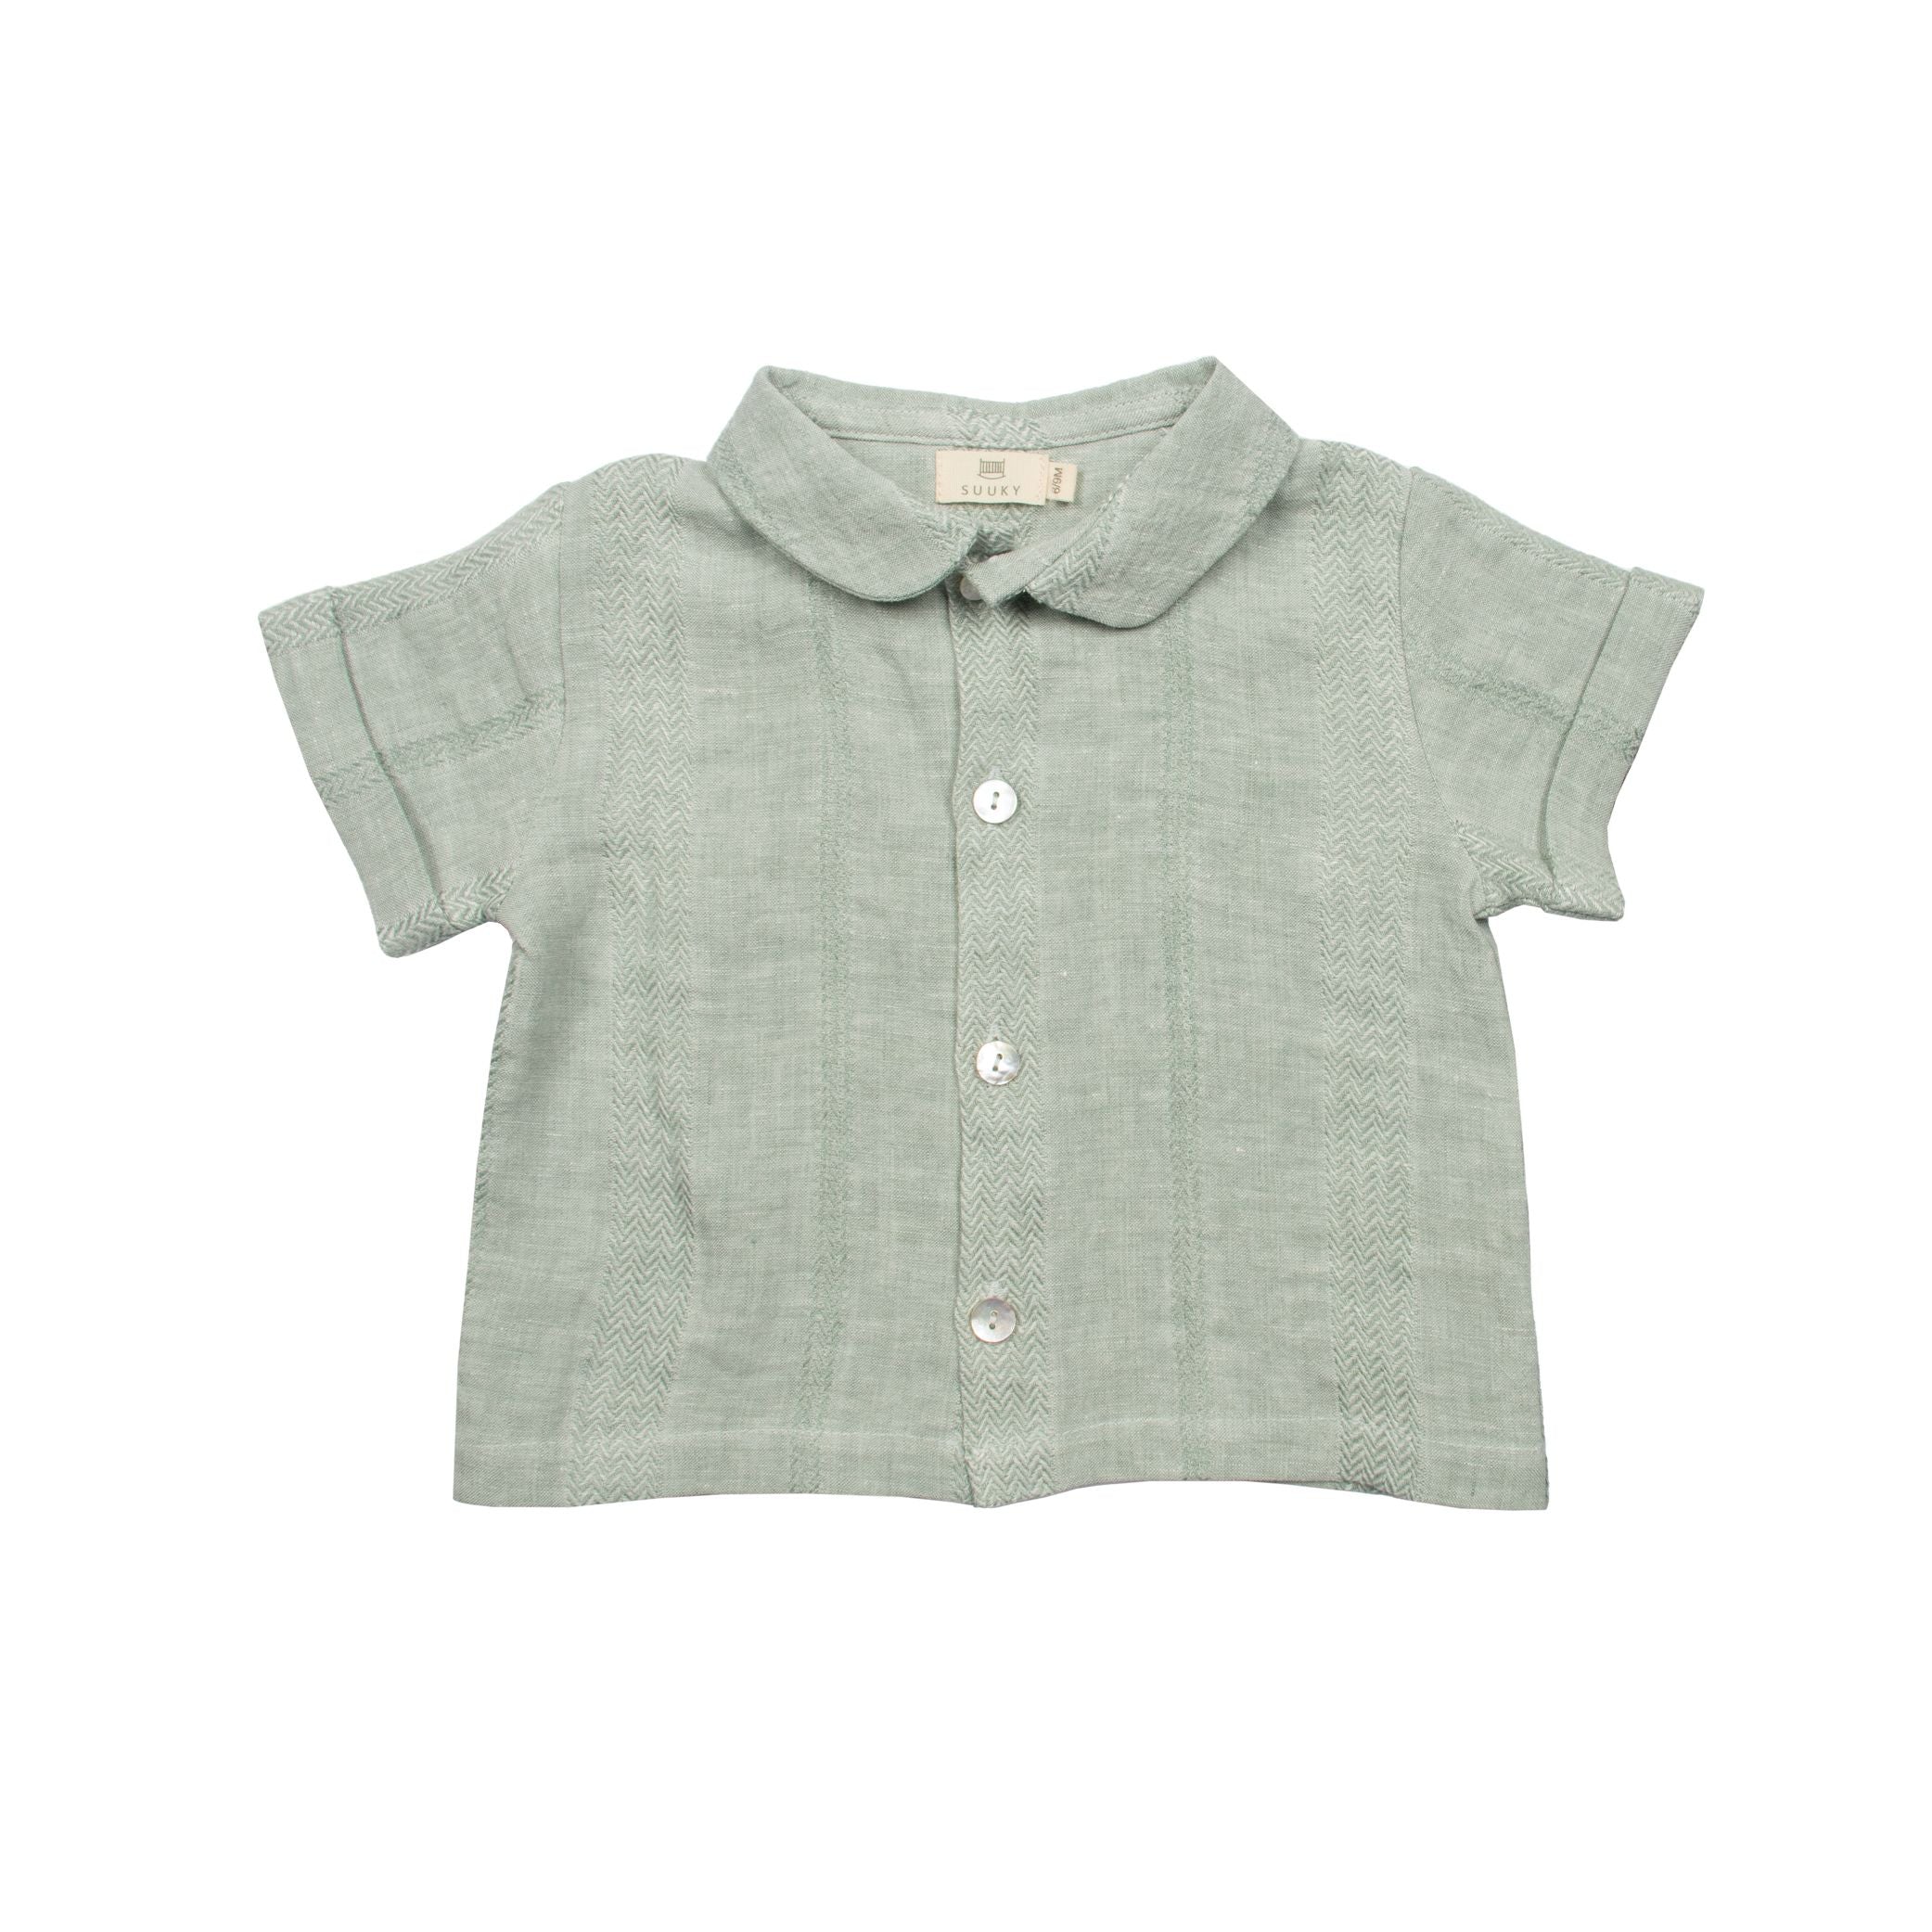 Textured Green Mint Linen polo top and shorts for baby. Gender Neutral outfit for baby for wedding.. made in portugal. Suuky Porto certified products. Beautiful for a garden wedding. Baby inspired outfit for holiday in Florida, Boca Raton. Ships to Canada and United States of America, Duty Free. Organic, natural Materials. First Birthday Gift for baby girl. Sustainable luxury for baby & toddler.